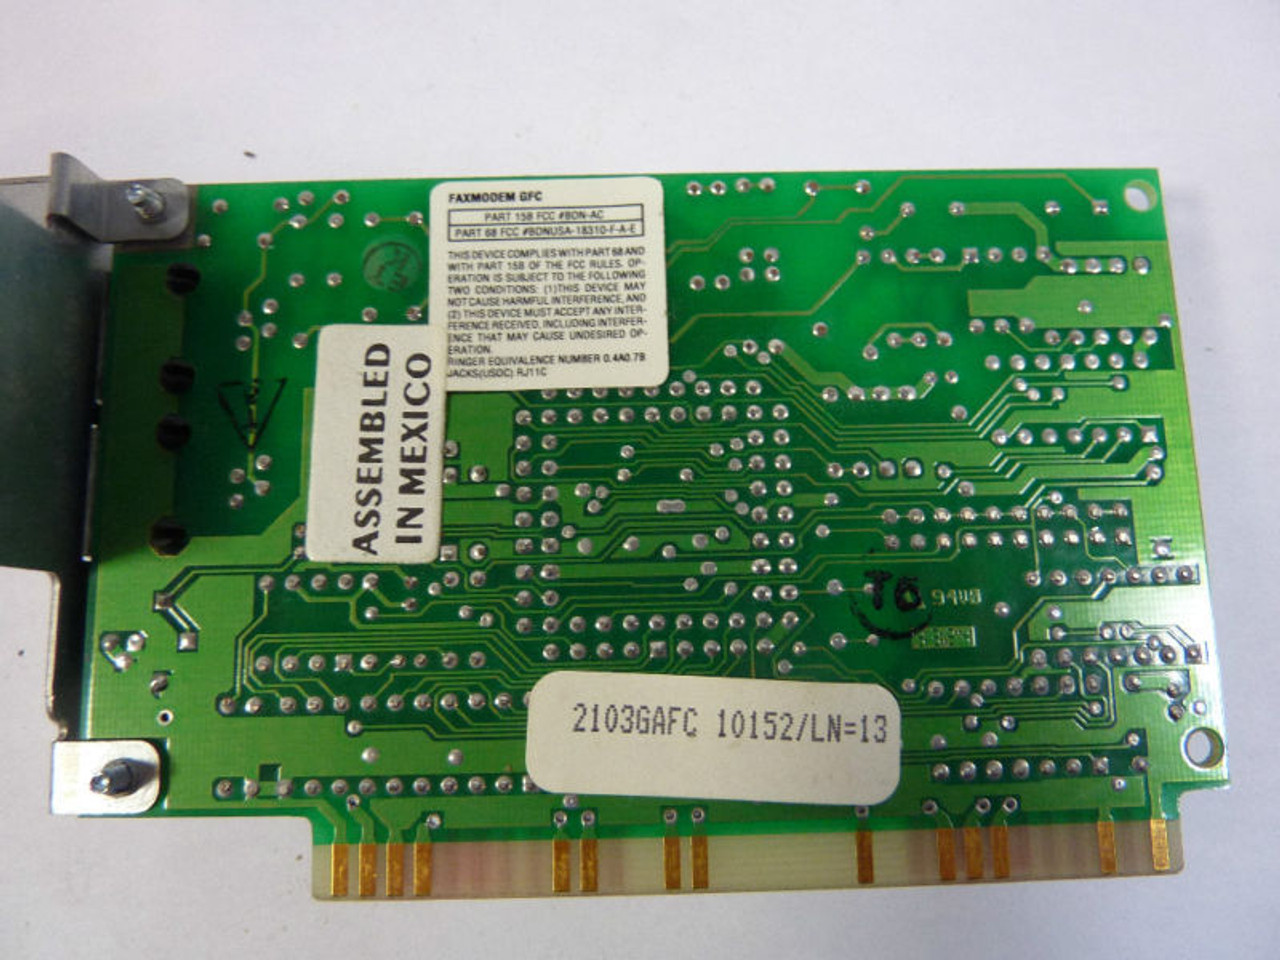 GFC Faxmodem PC Controller Card USED